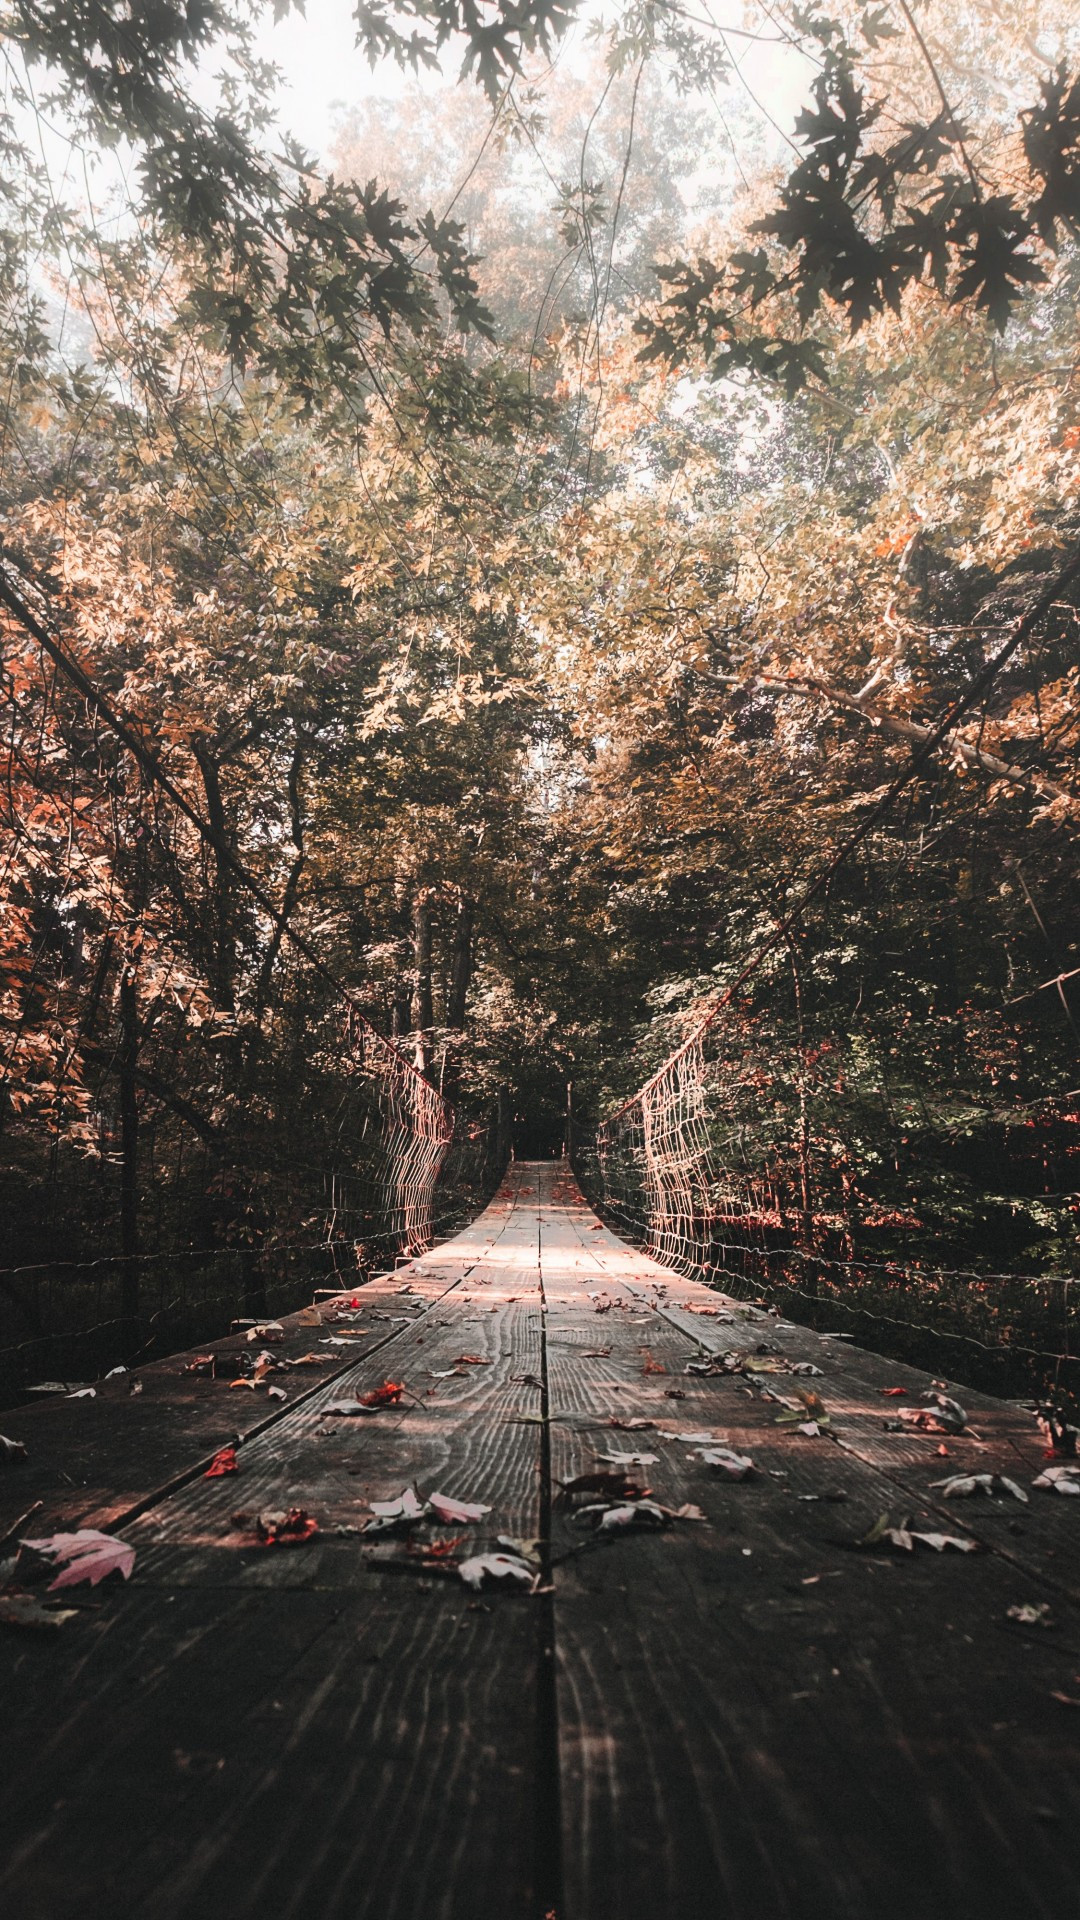 Download 1080x1920 Wooden Bridge, Autumn, Leaves Wallpapers for iPhone 8, iPhone 7 Plus, iPhone 6+, Sony Xperia Z, HTC One